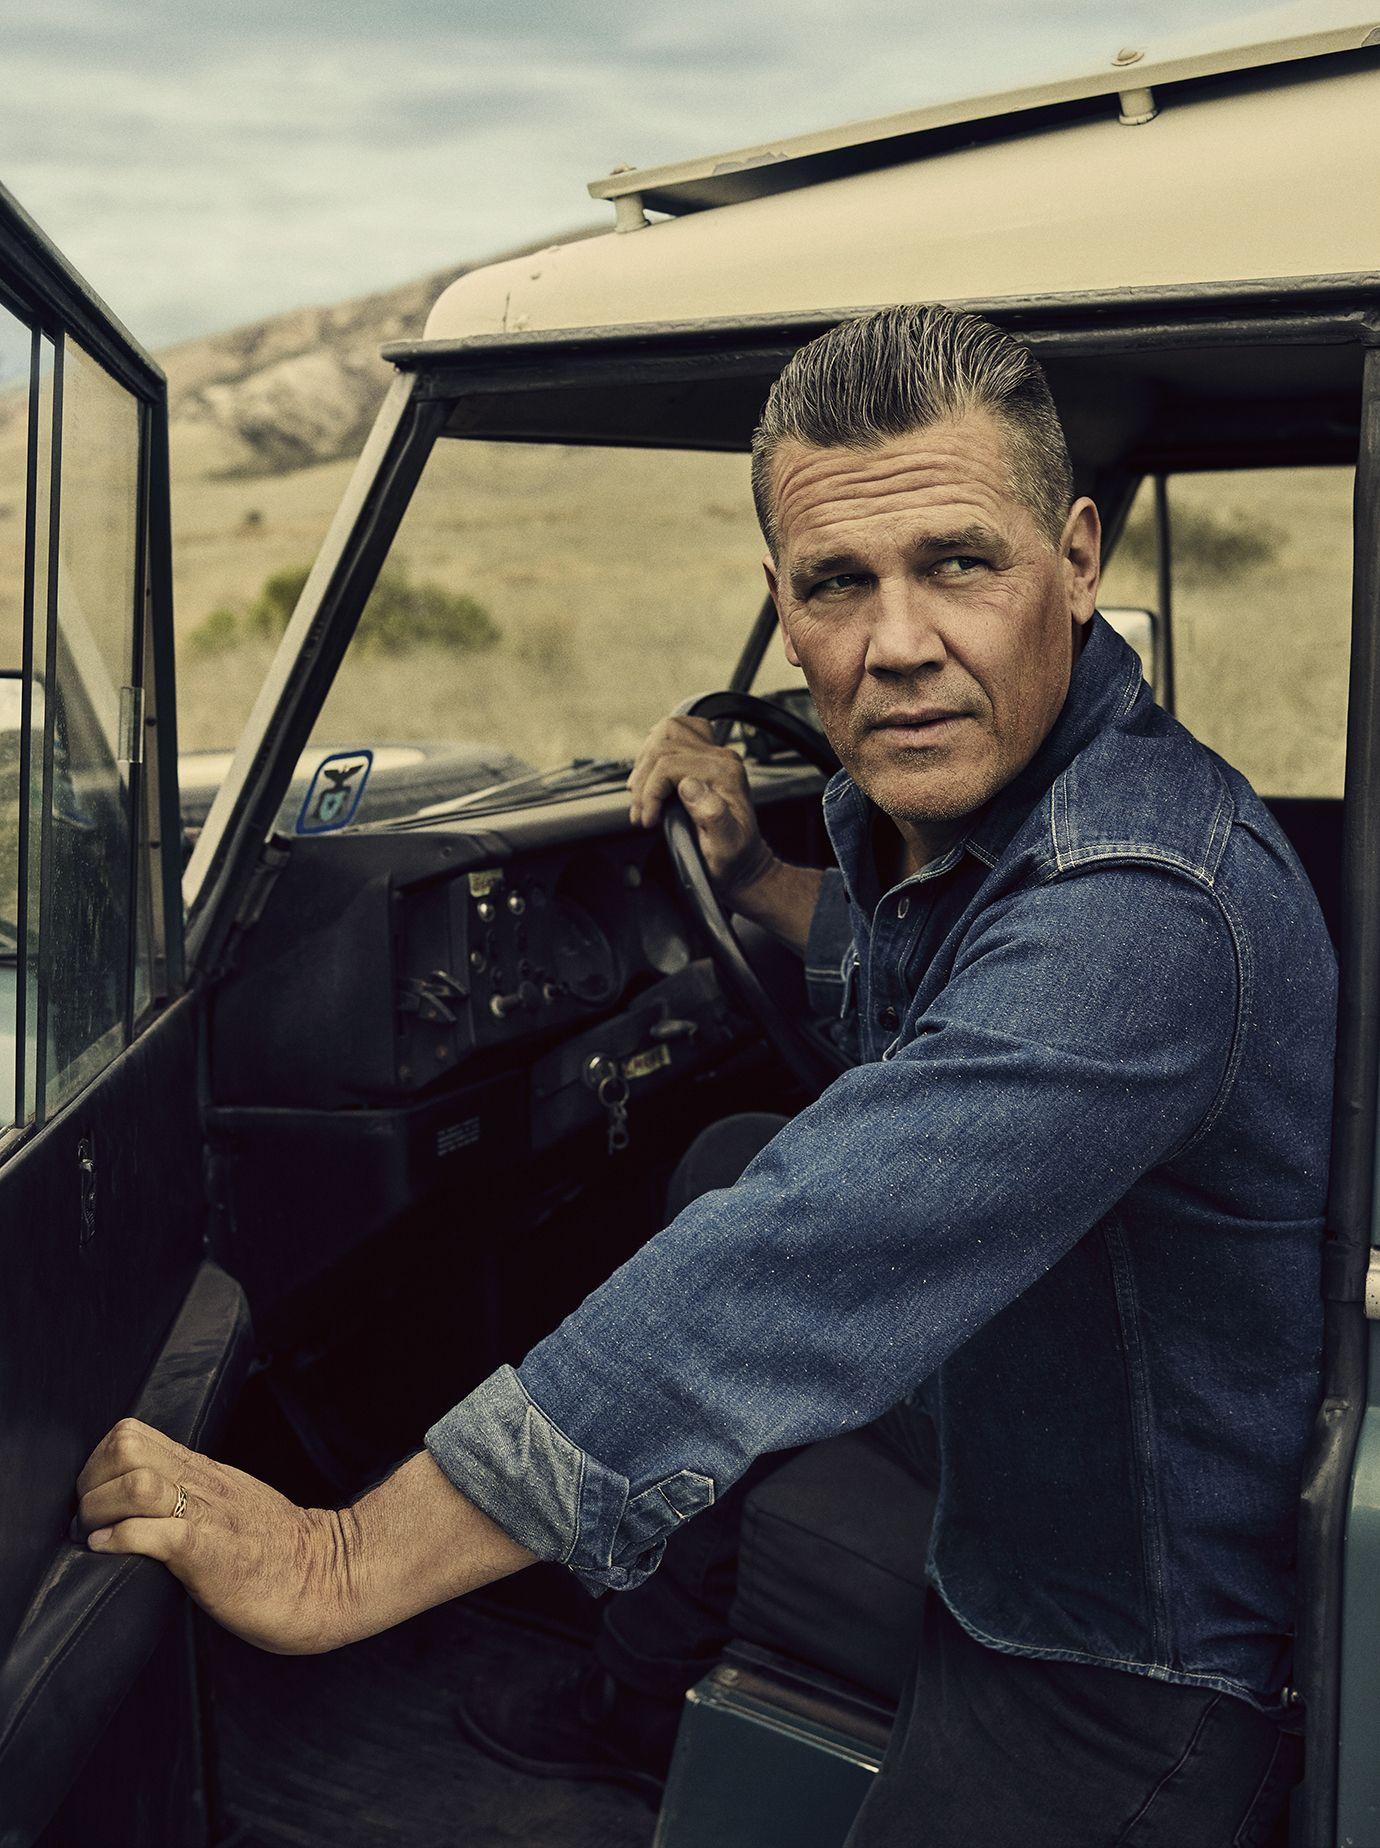 Josh Brolin Might Be the Realest Guy in Hollywood